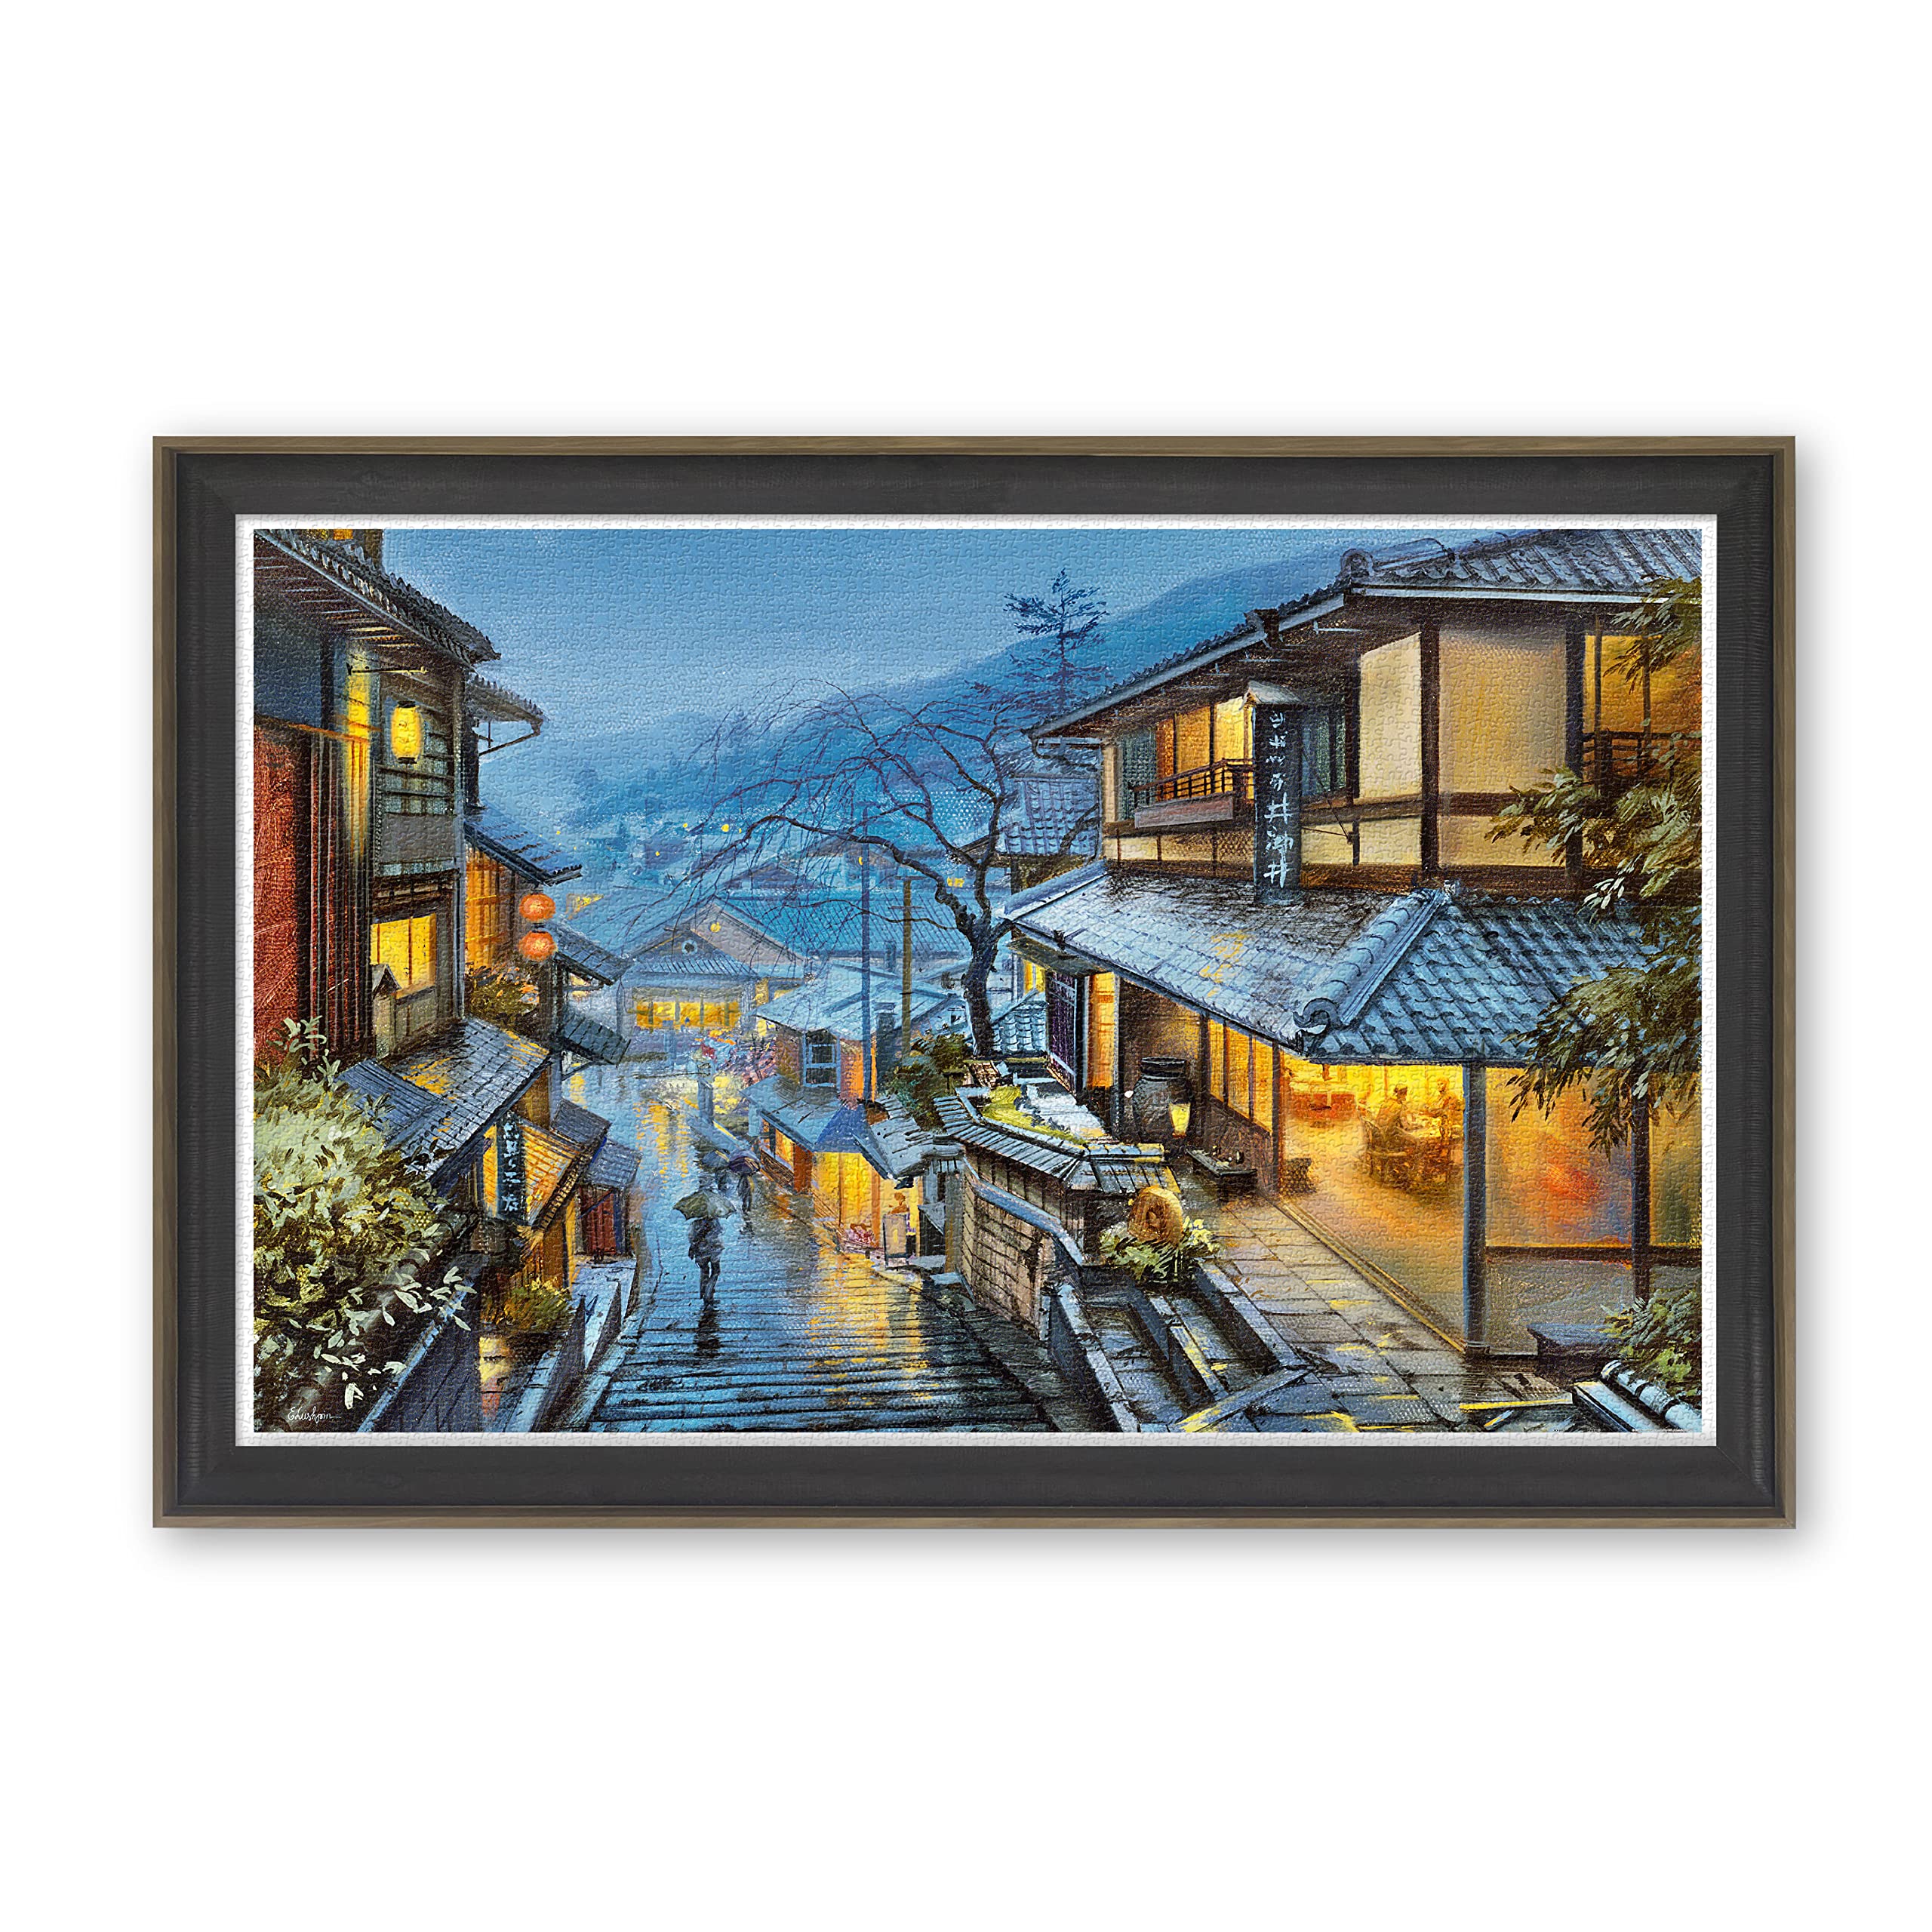 Old Kyoto by Evgeny Lushpin - Premium Plastic Puzzle - 4000 Pieces